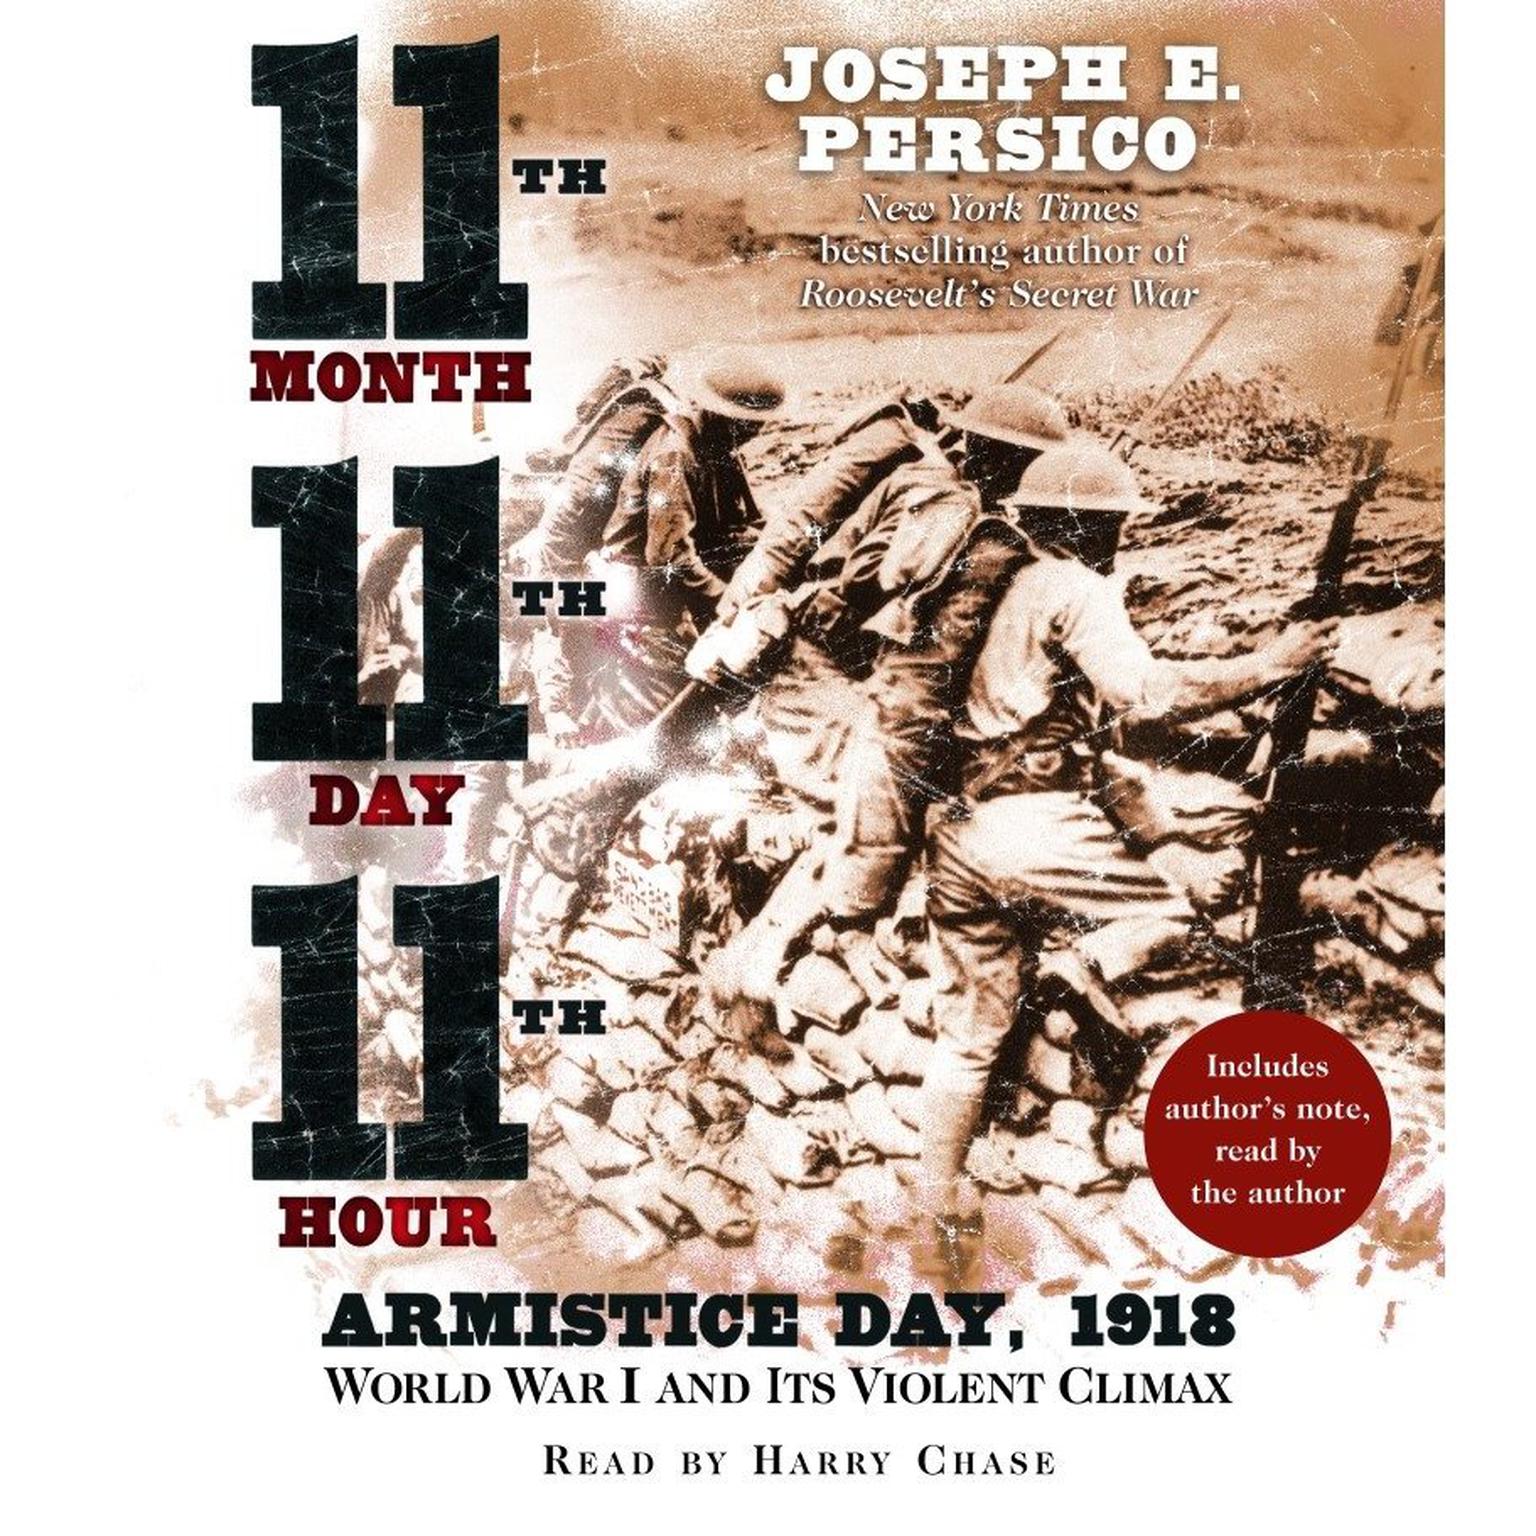 Eleventh Month, Eleventh Day, Eleventh Hour (Abridged): Armistice Day, 1918 World War I and Its Violent Climax Audiobook, by Joseph E. Persico